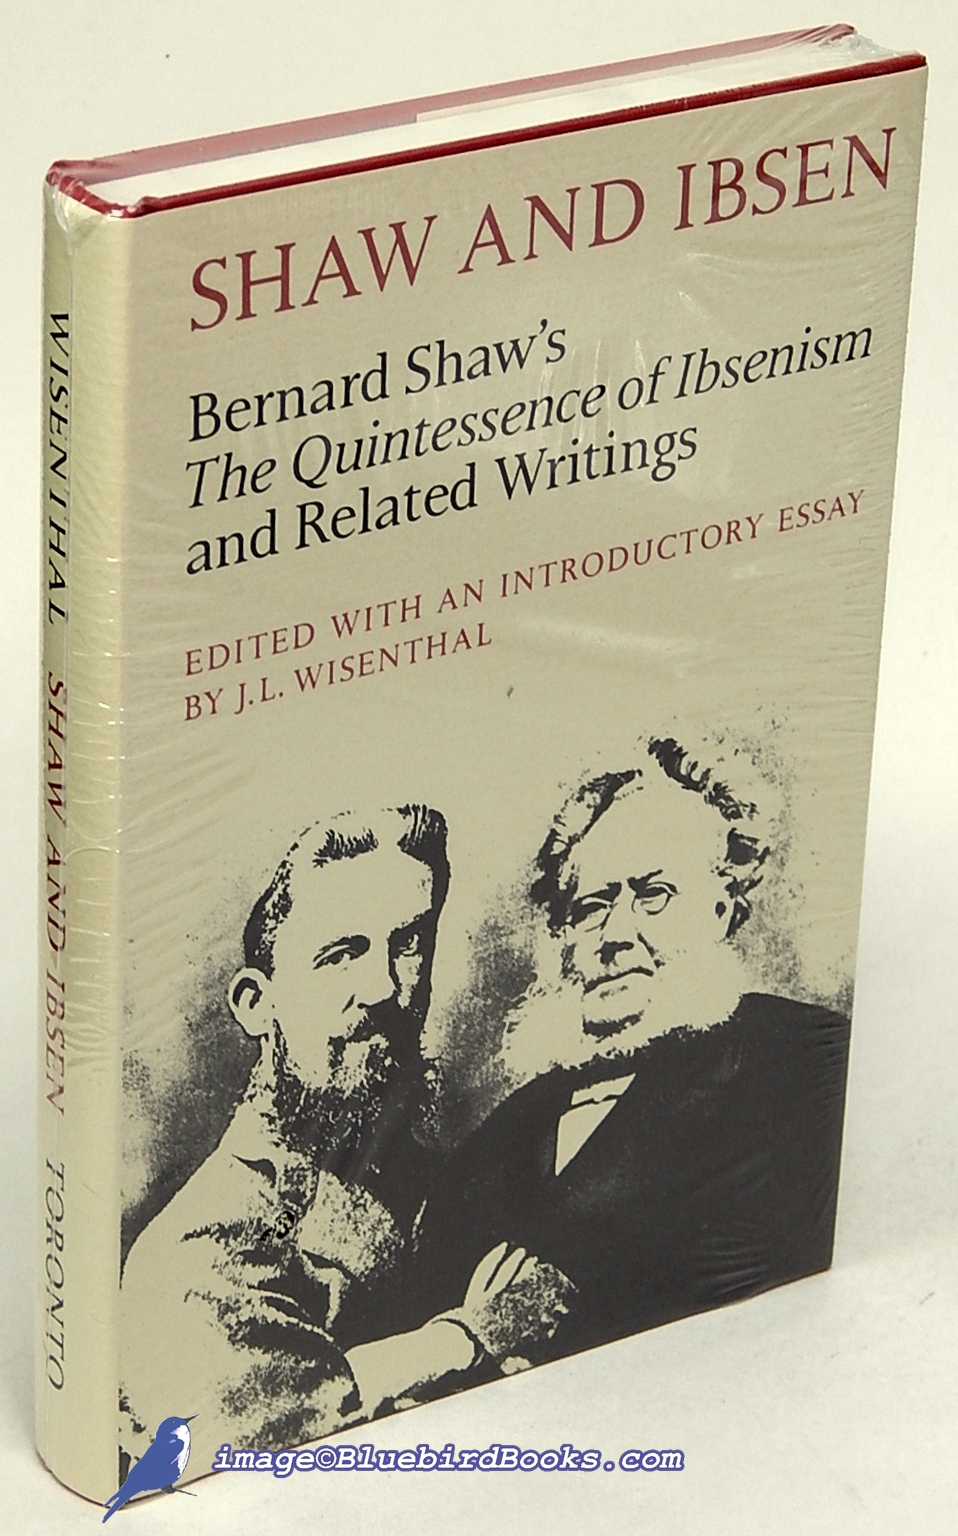 Image for Shaw and Ibsen: Bernard Shaw's "The Quintessence of Ibsenism", and Related Writings